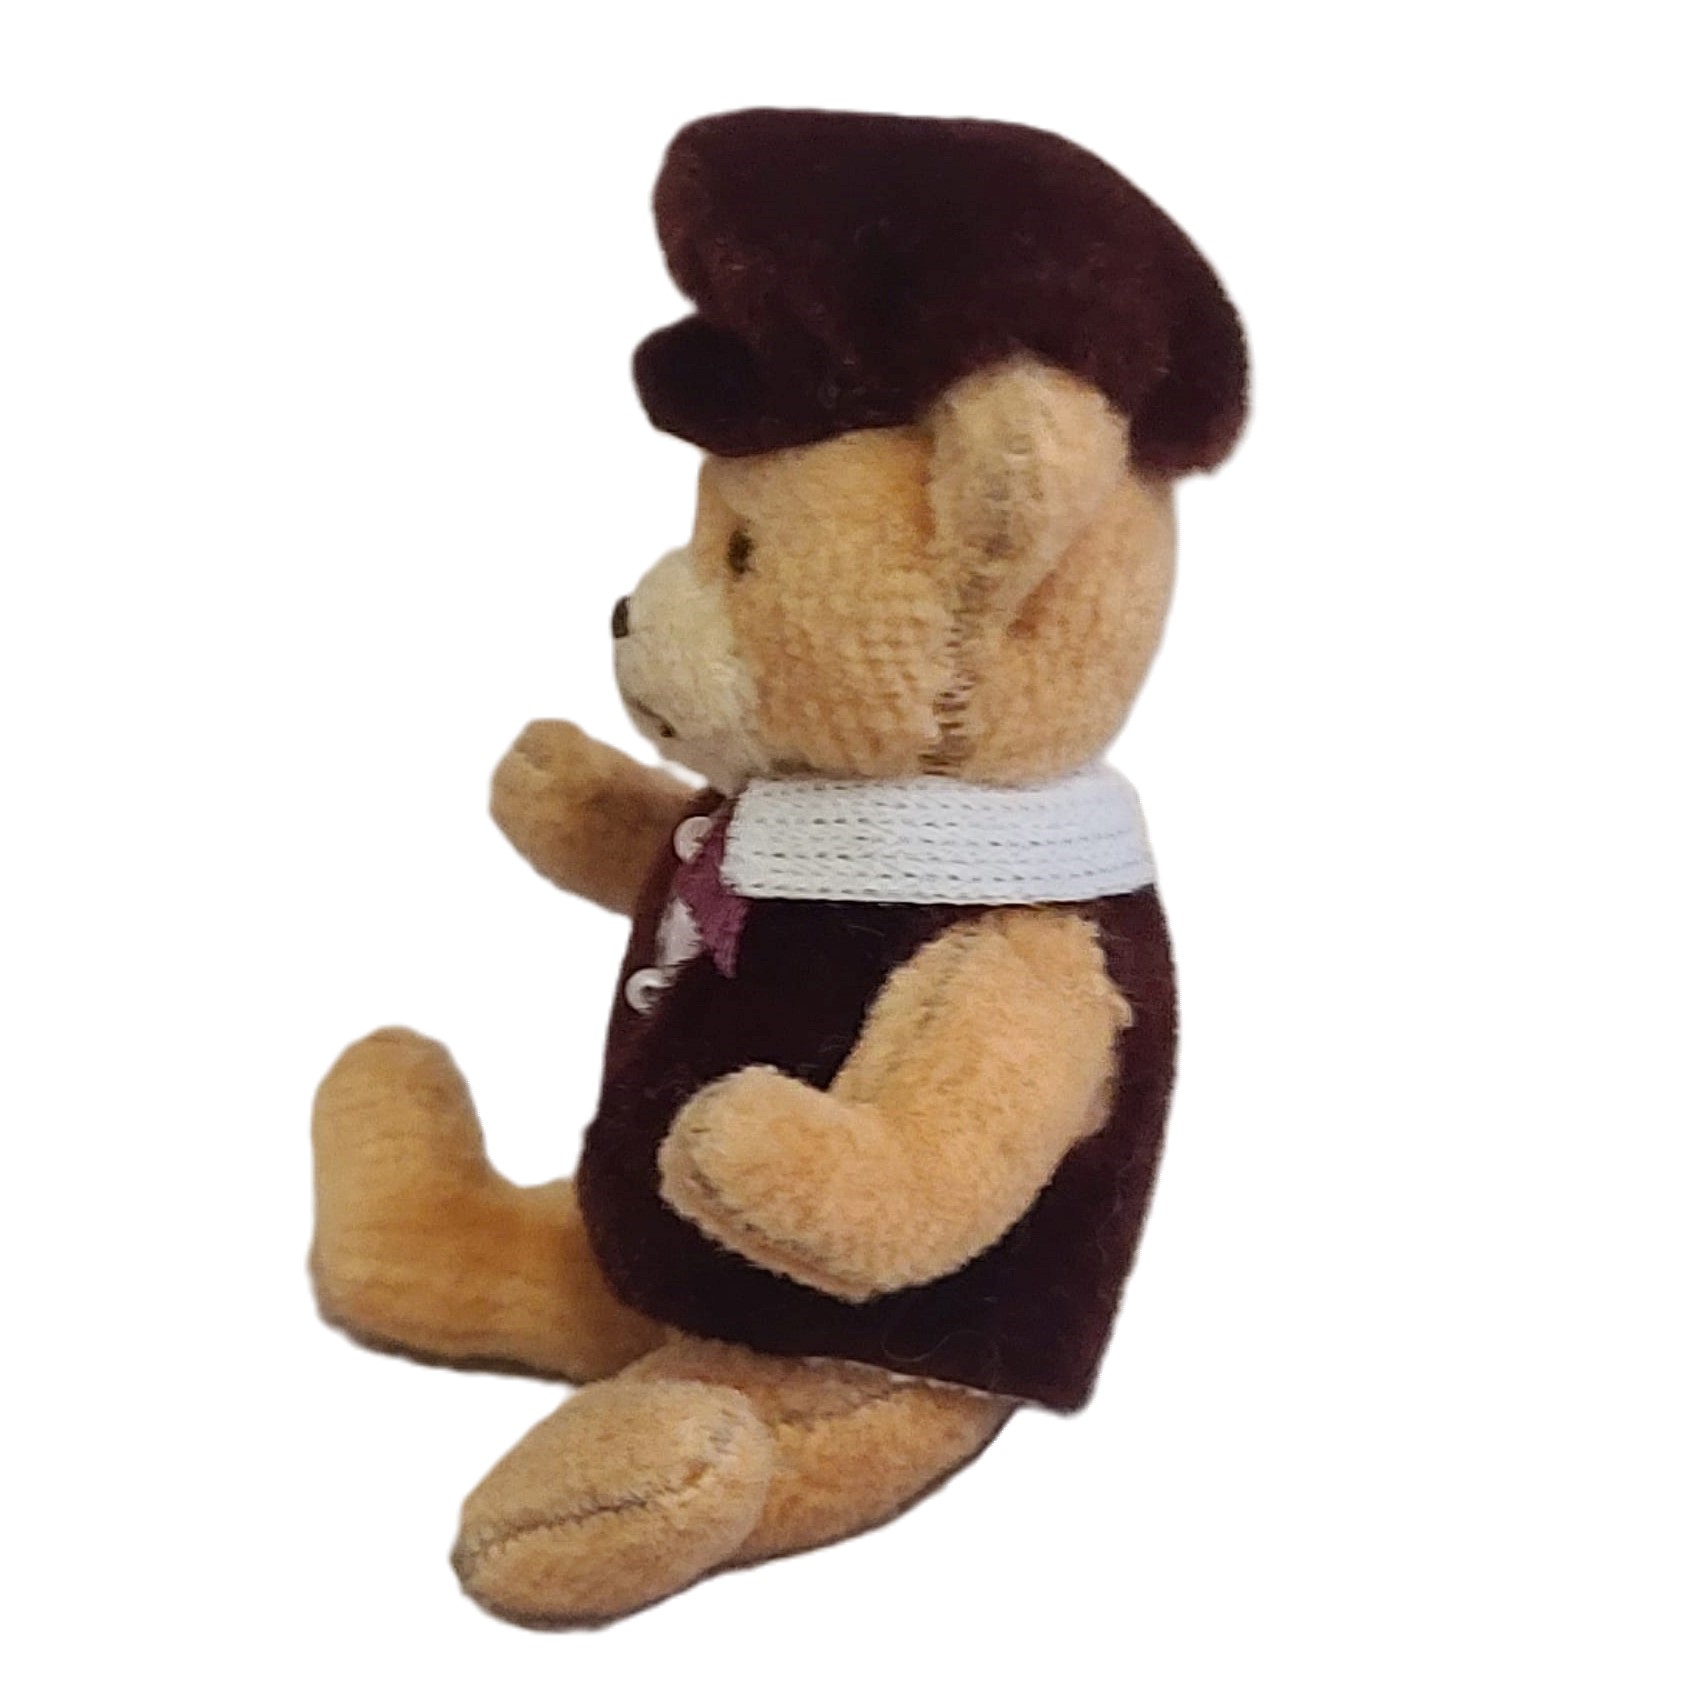 Vintage mini bear jointed bear 3" tall with vest and hat